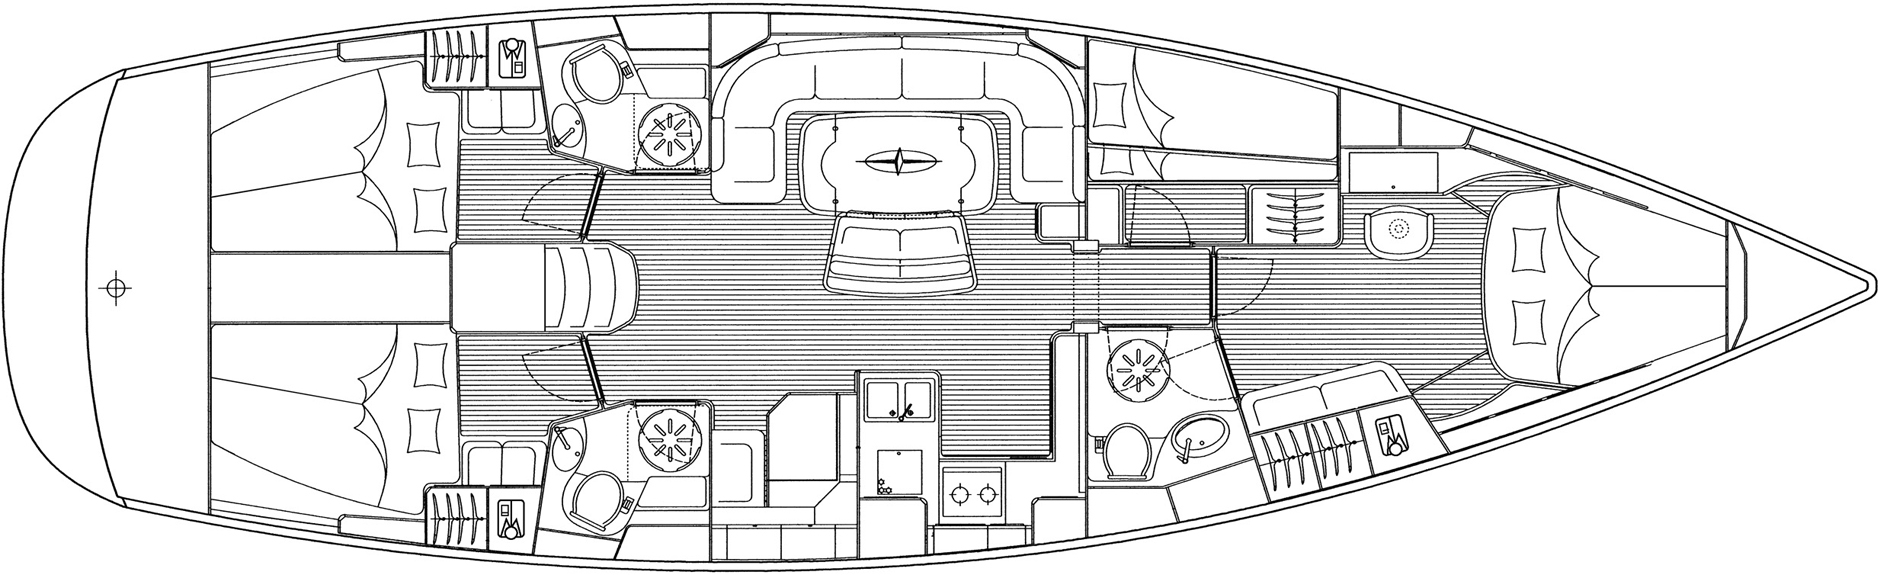 Plan of a bareboat yacht charter being used for accommodation in venice at christmas